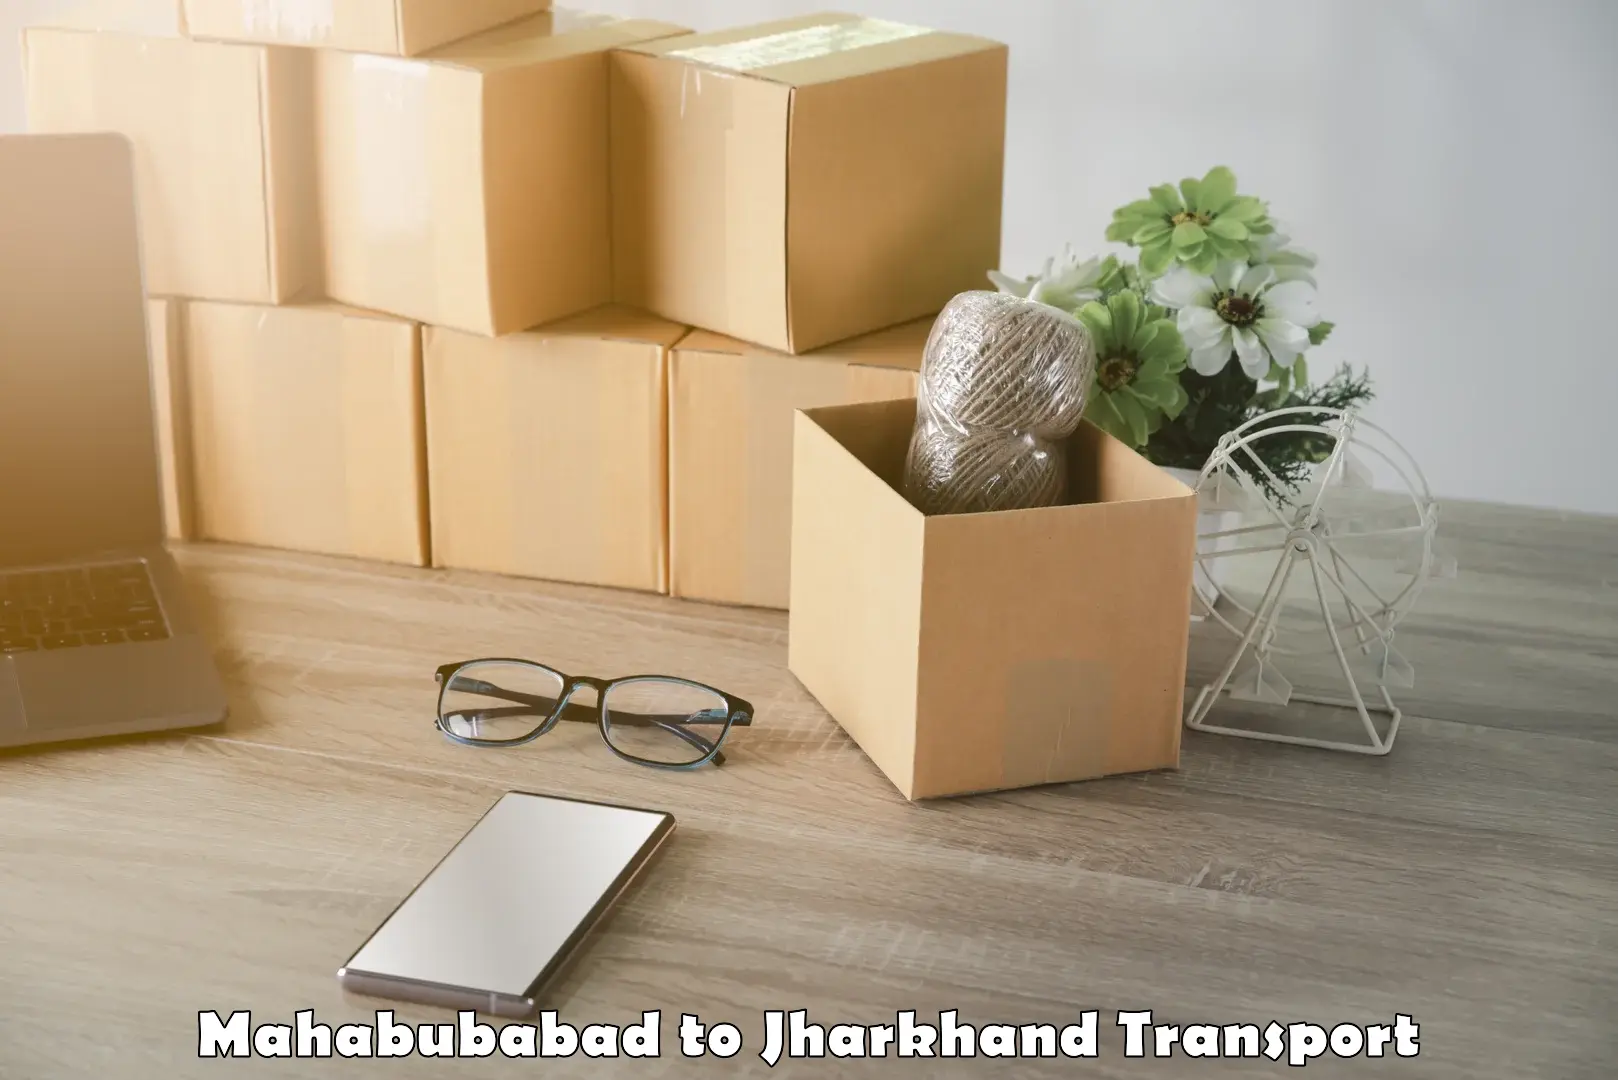 Delivery service Mahabubabad to Jharkhand